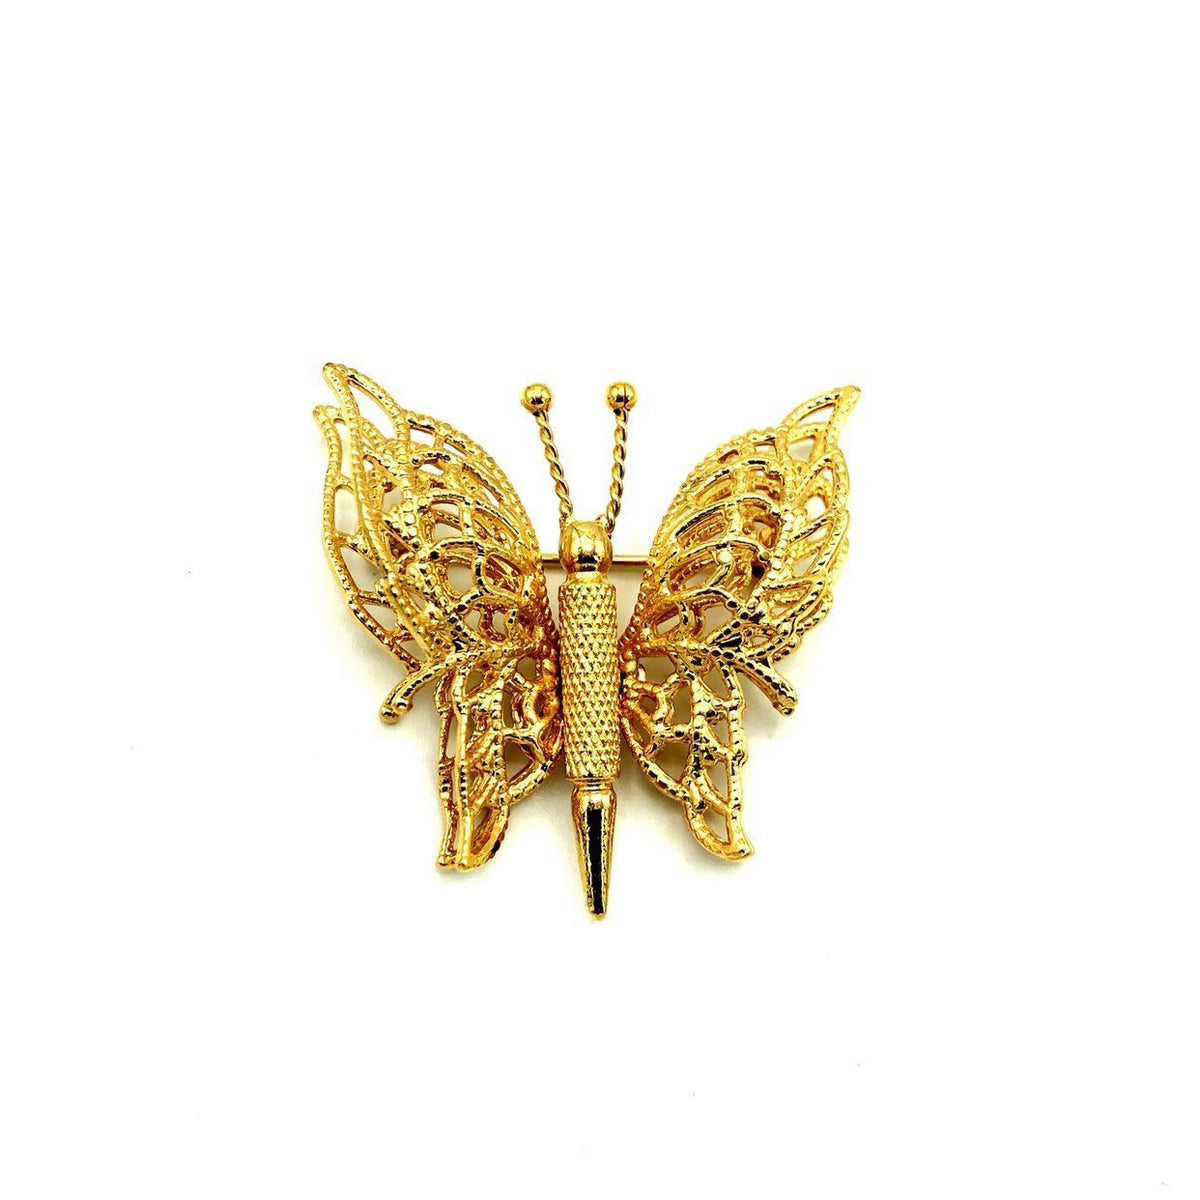 Gold Classic Monet Filigree Style Butterfly Vintage Brooch - 24 Wishes Vintage Jewelry